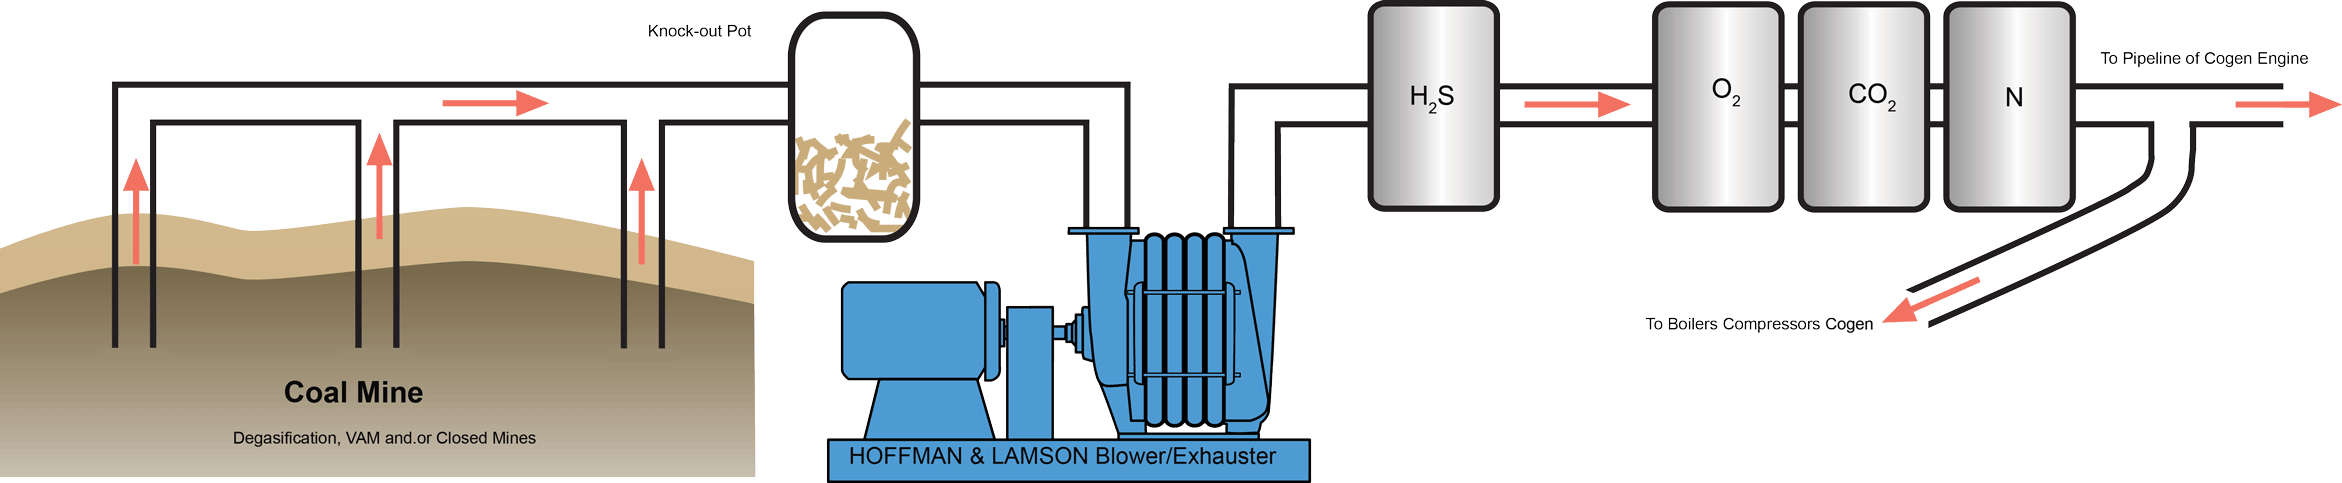 HOFFMAN & LAMSON products for Coal Bed Methane Recovery